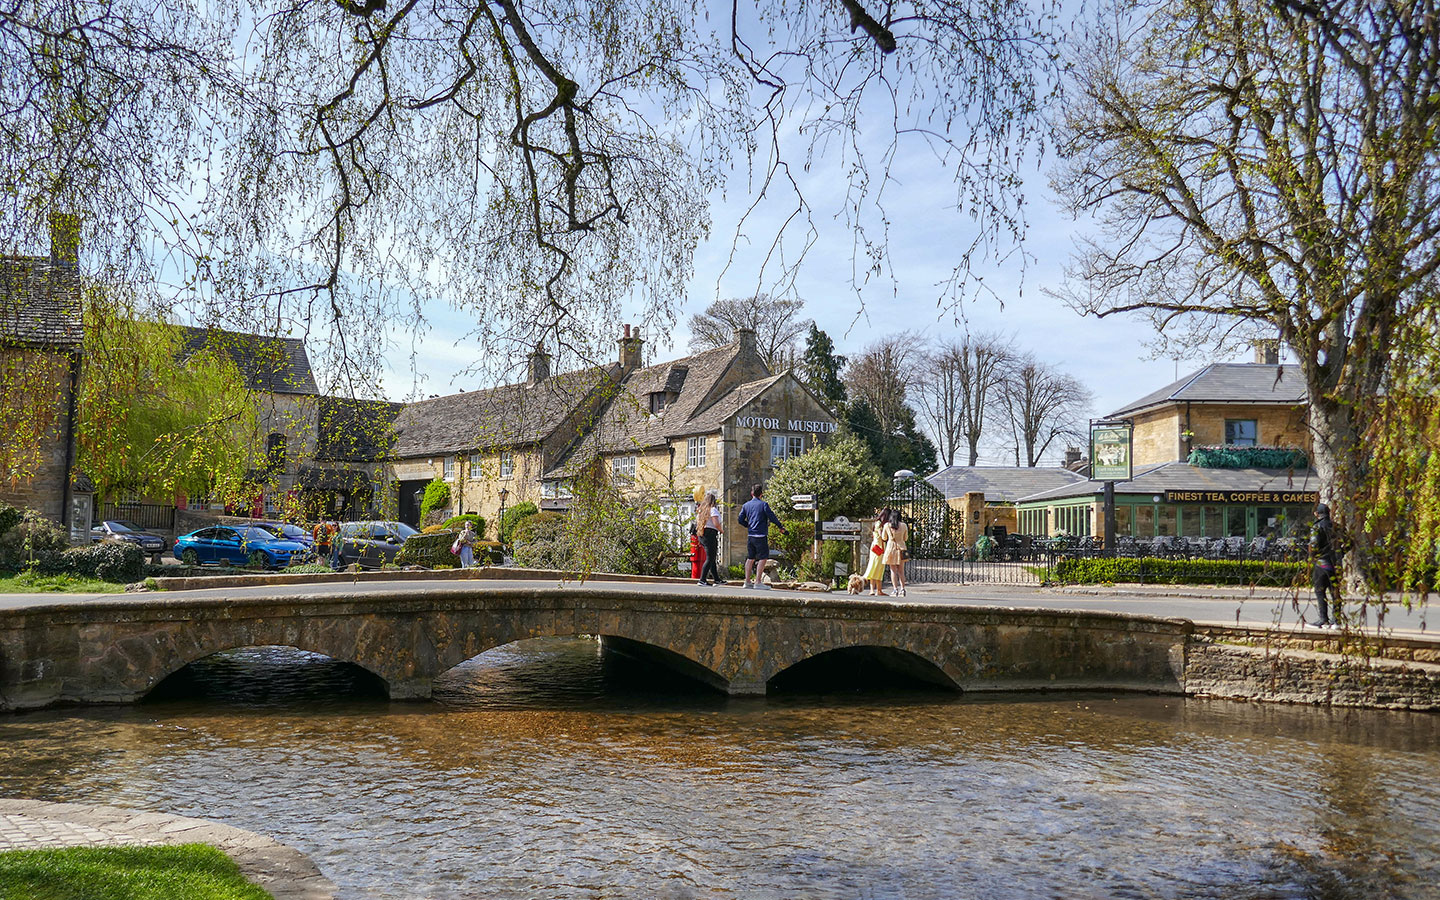 The Cotswold Motoring Museum in Bourton-on-the-Water